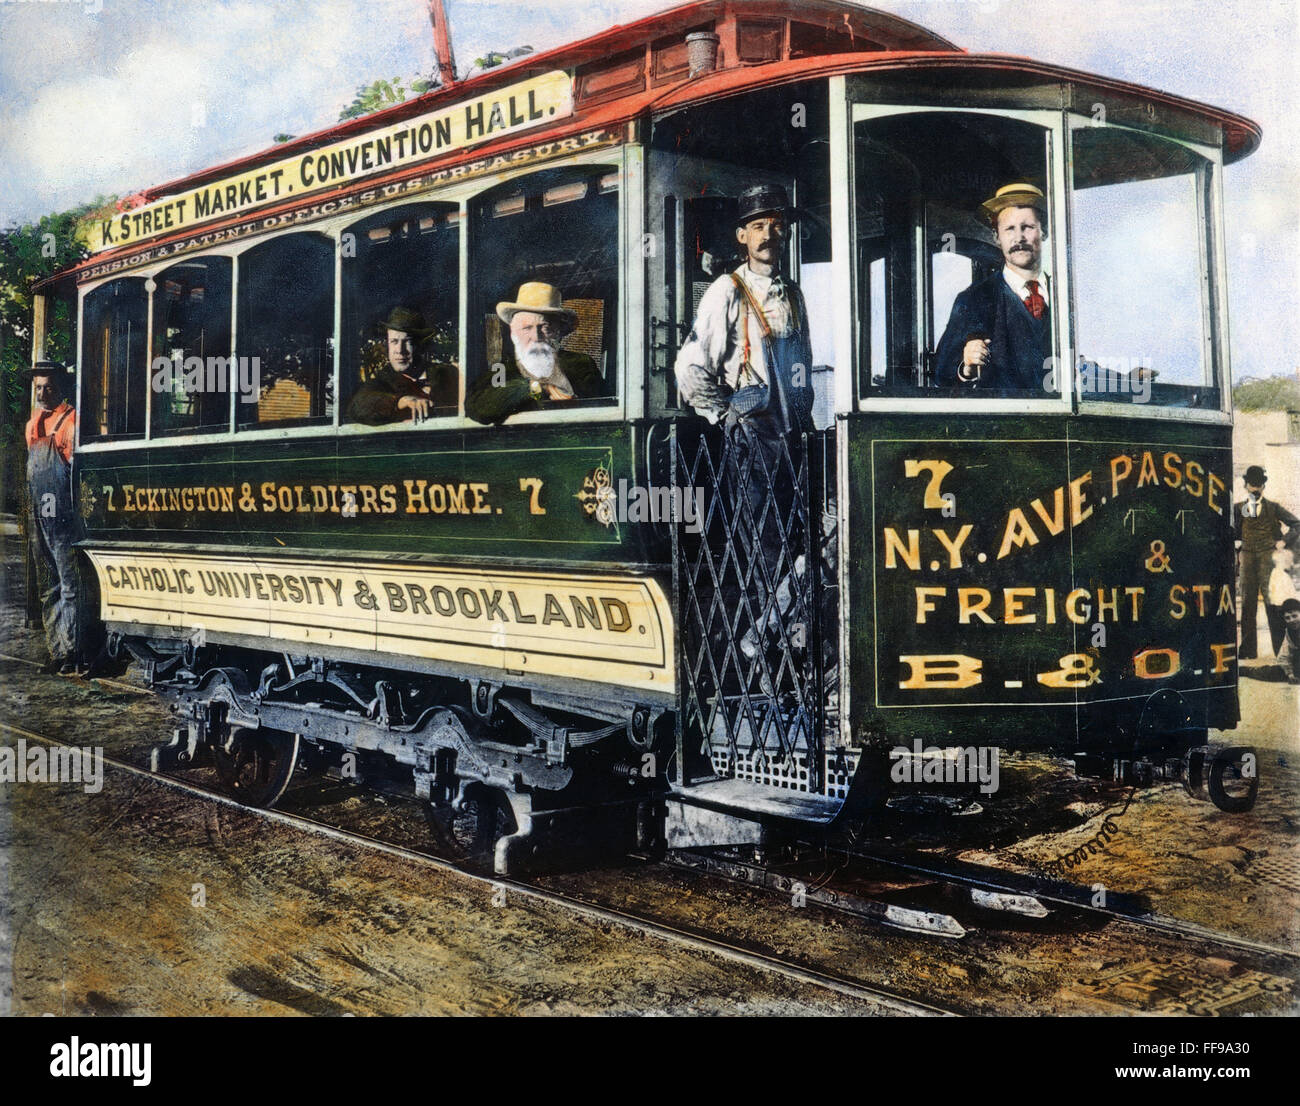 STREET CAR, c1895. /nAn electric street car in Washington, D.C. employing a surface contact system using a skate to supply the power at the front of the car. Oil over a photograph, c. 1895. Stock Photo